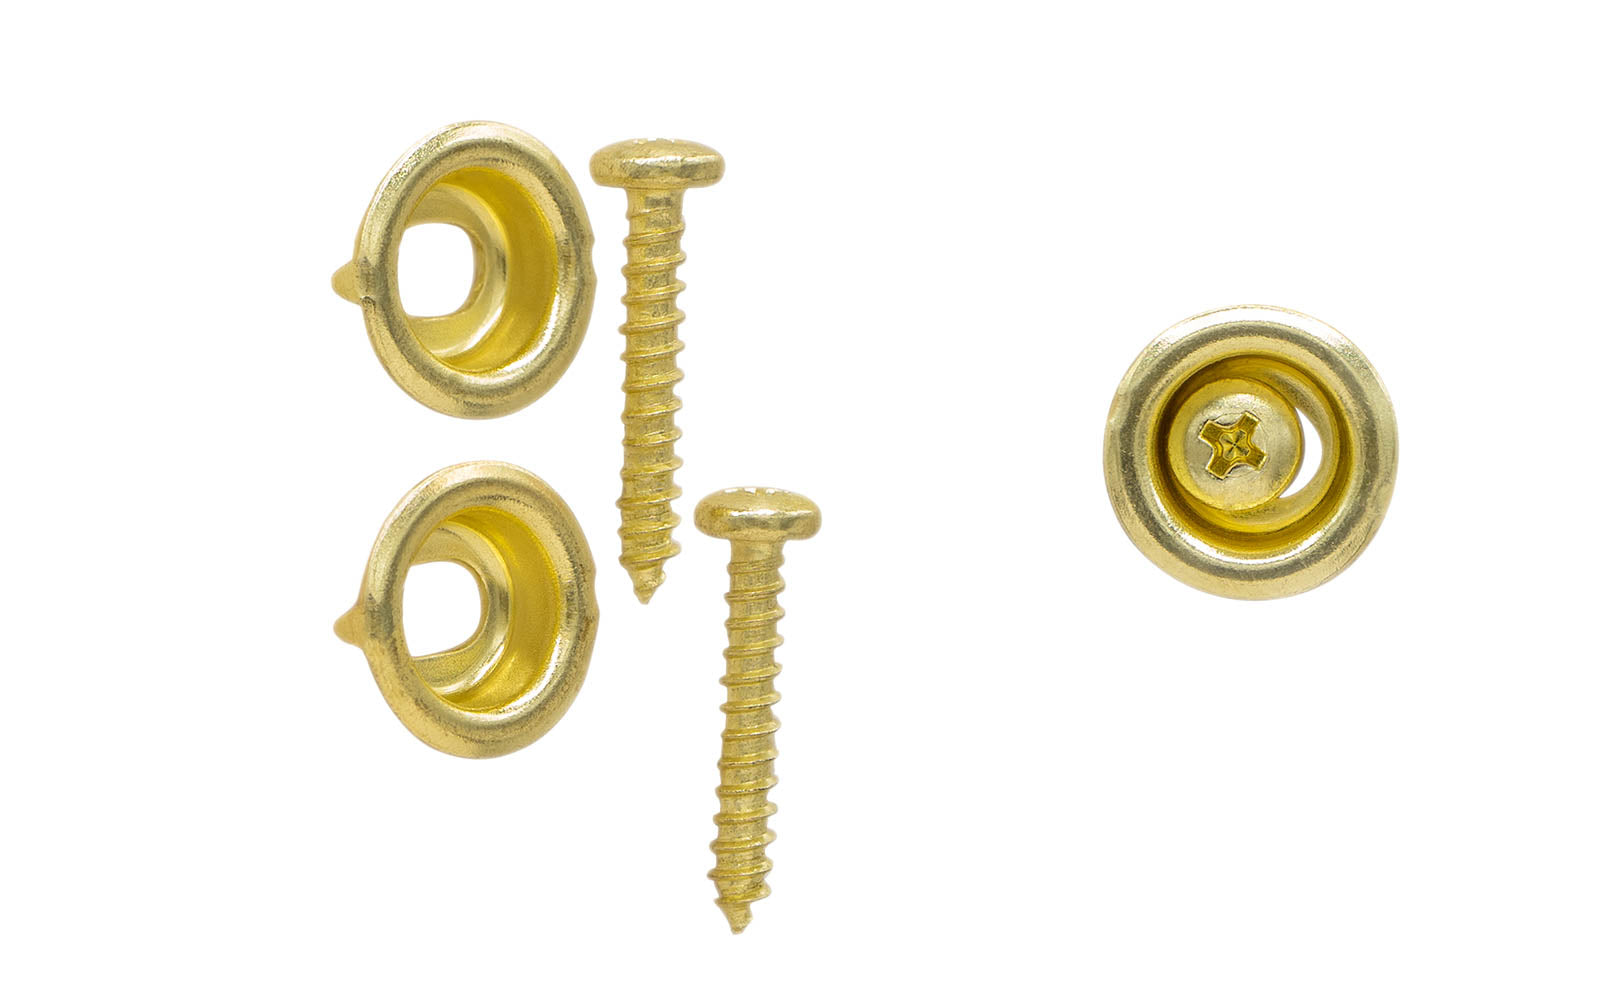 Vintage-style Hardware · Solid Brass Sash Stop Bead Adjusters - Pair. Made of solid brass - Allows 1/8